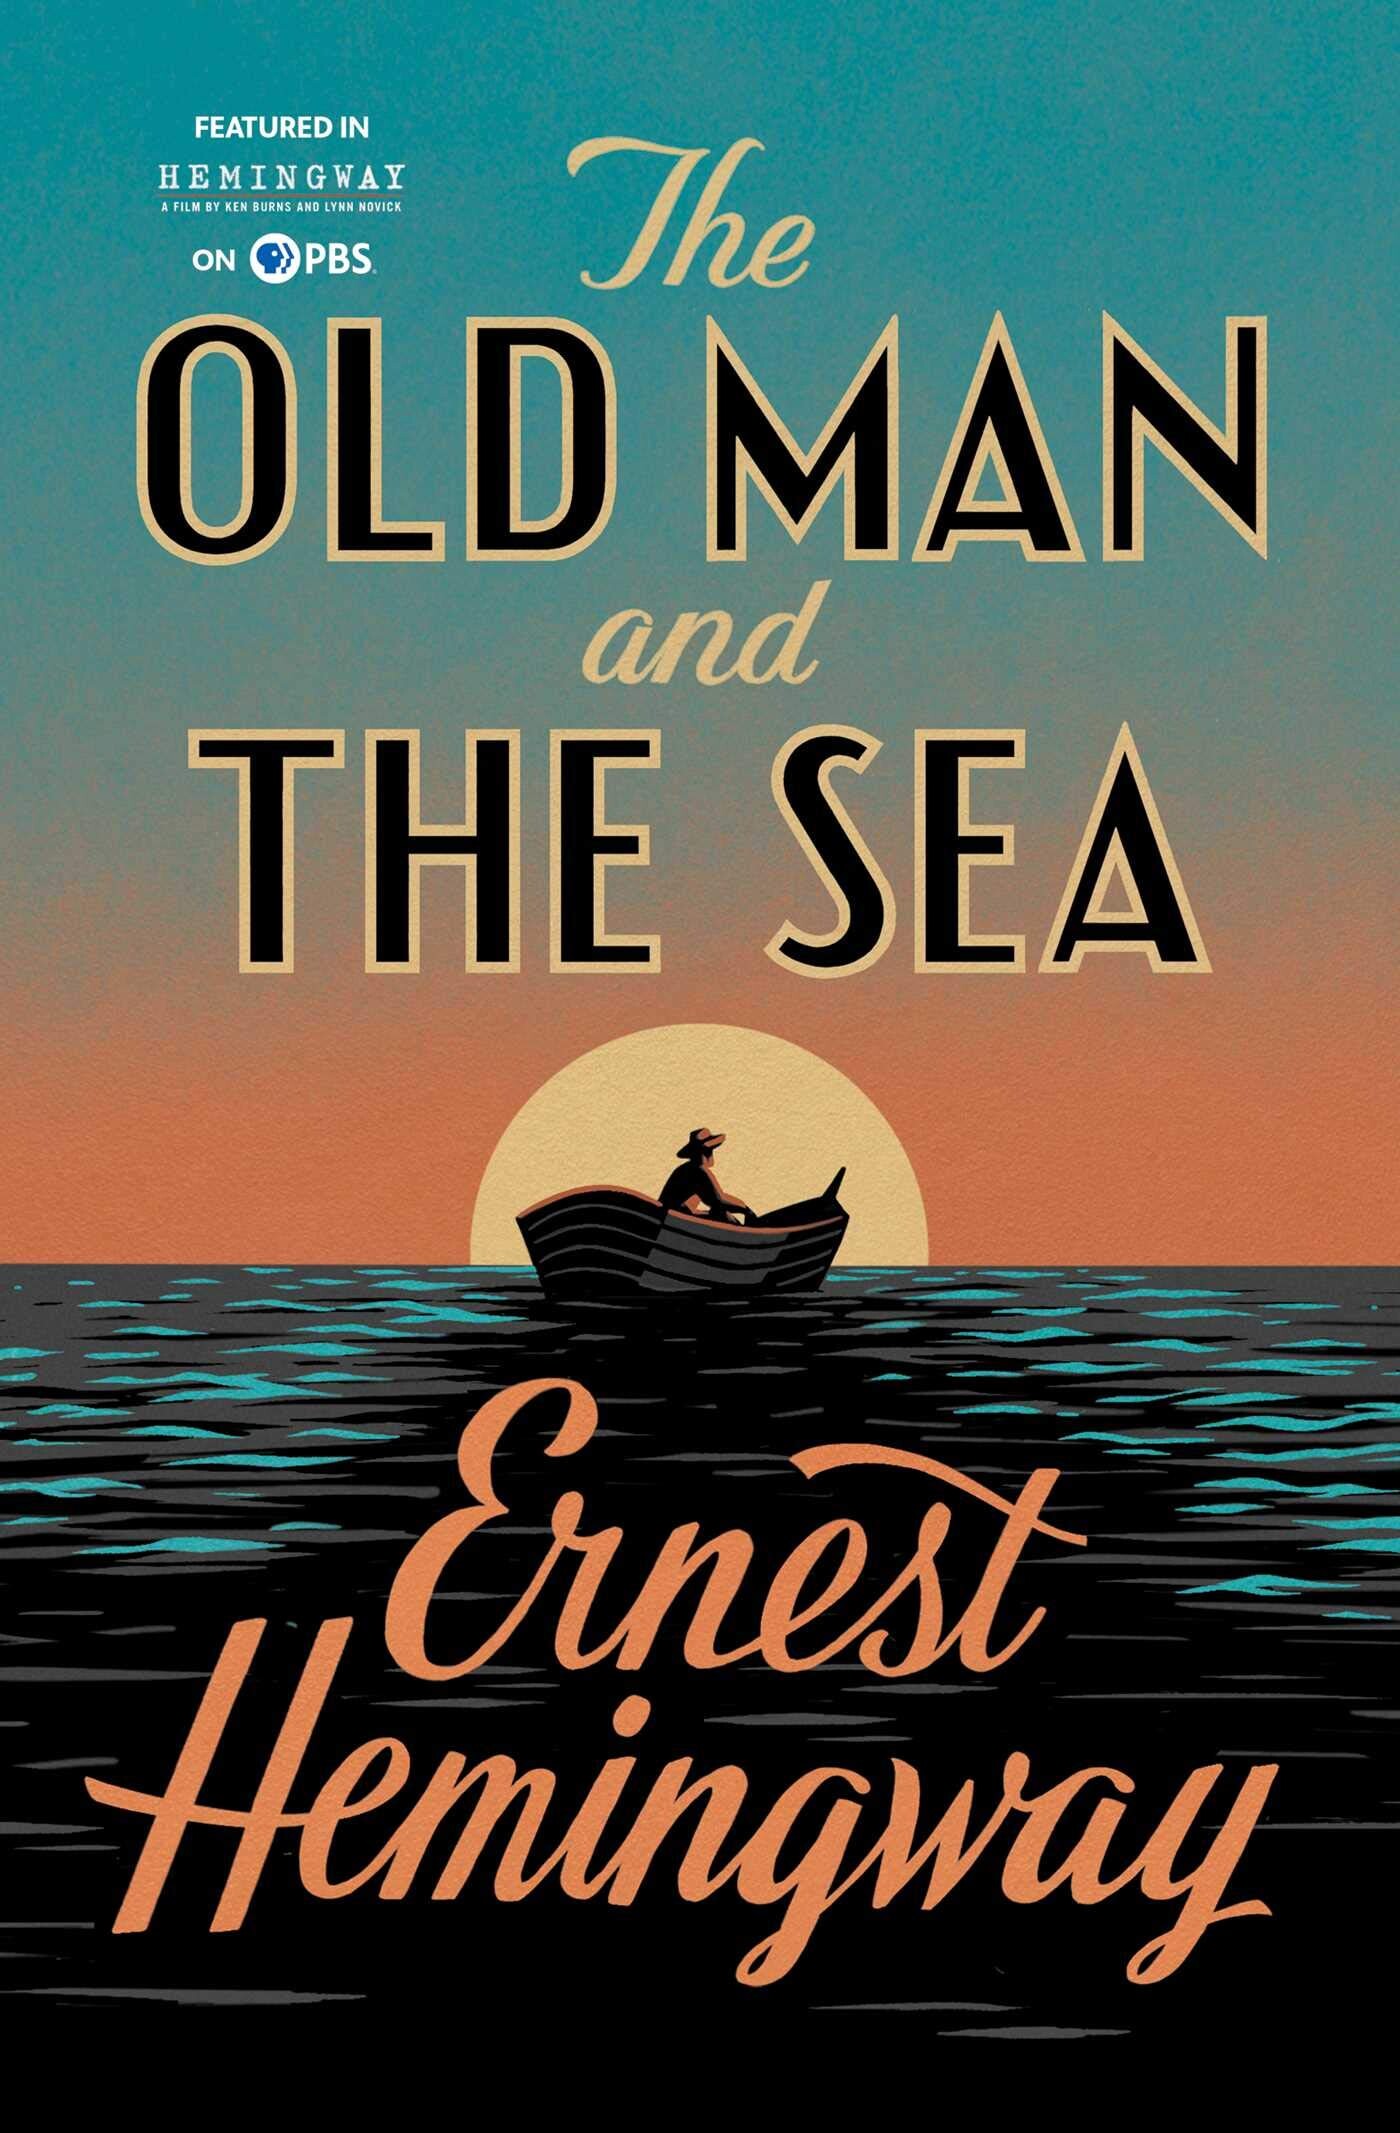 who wrote the old man and the sea